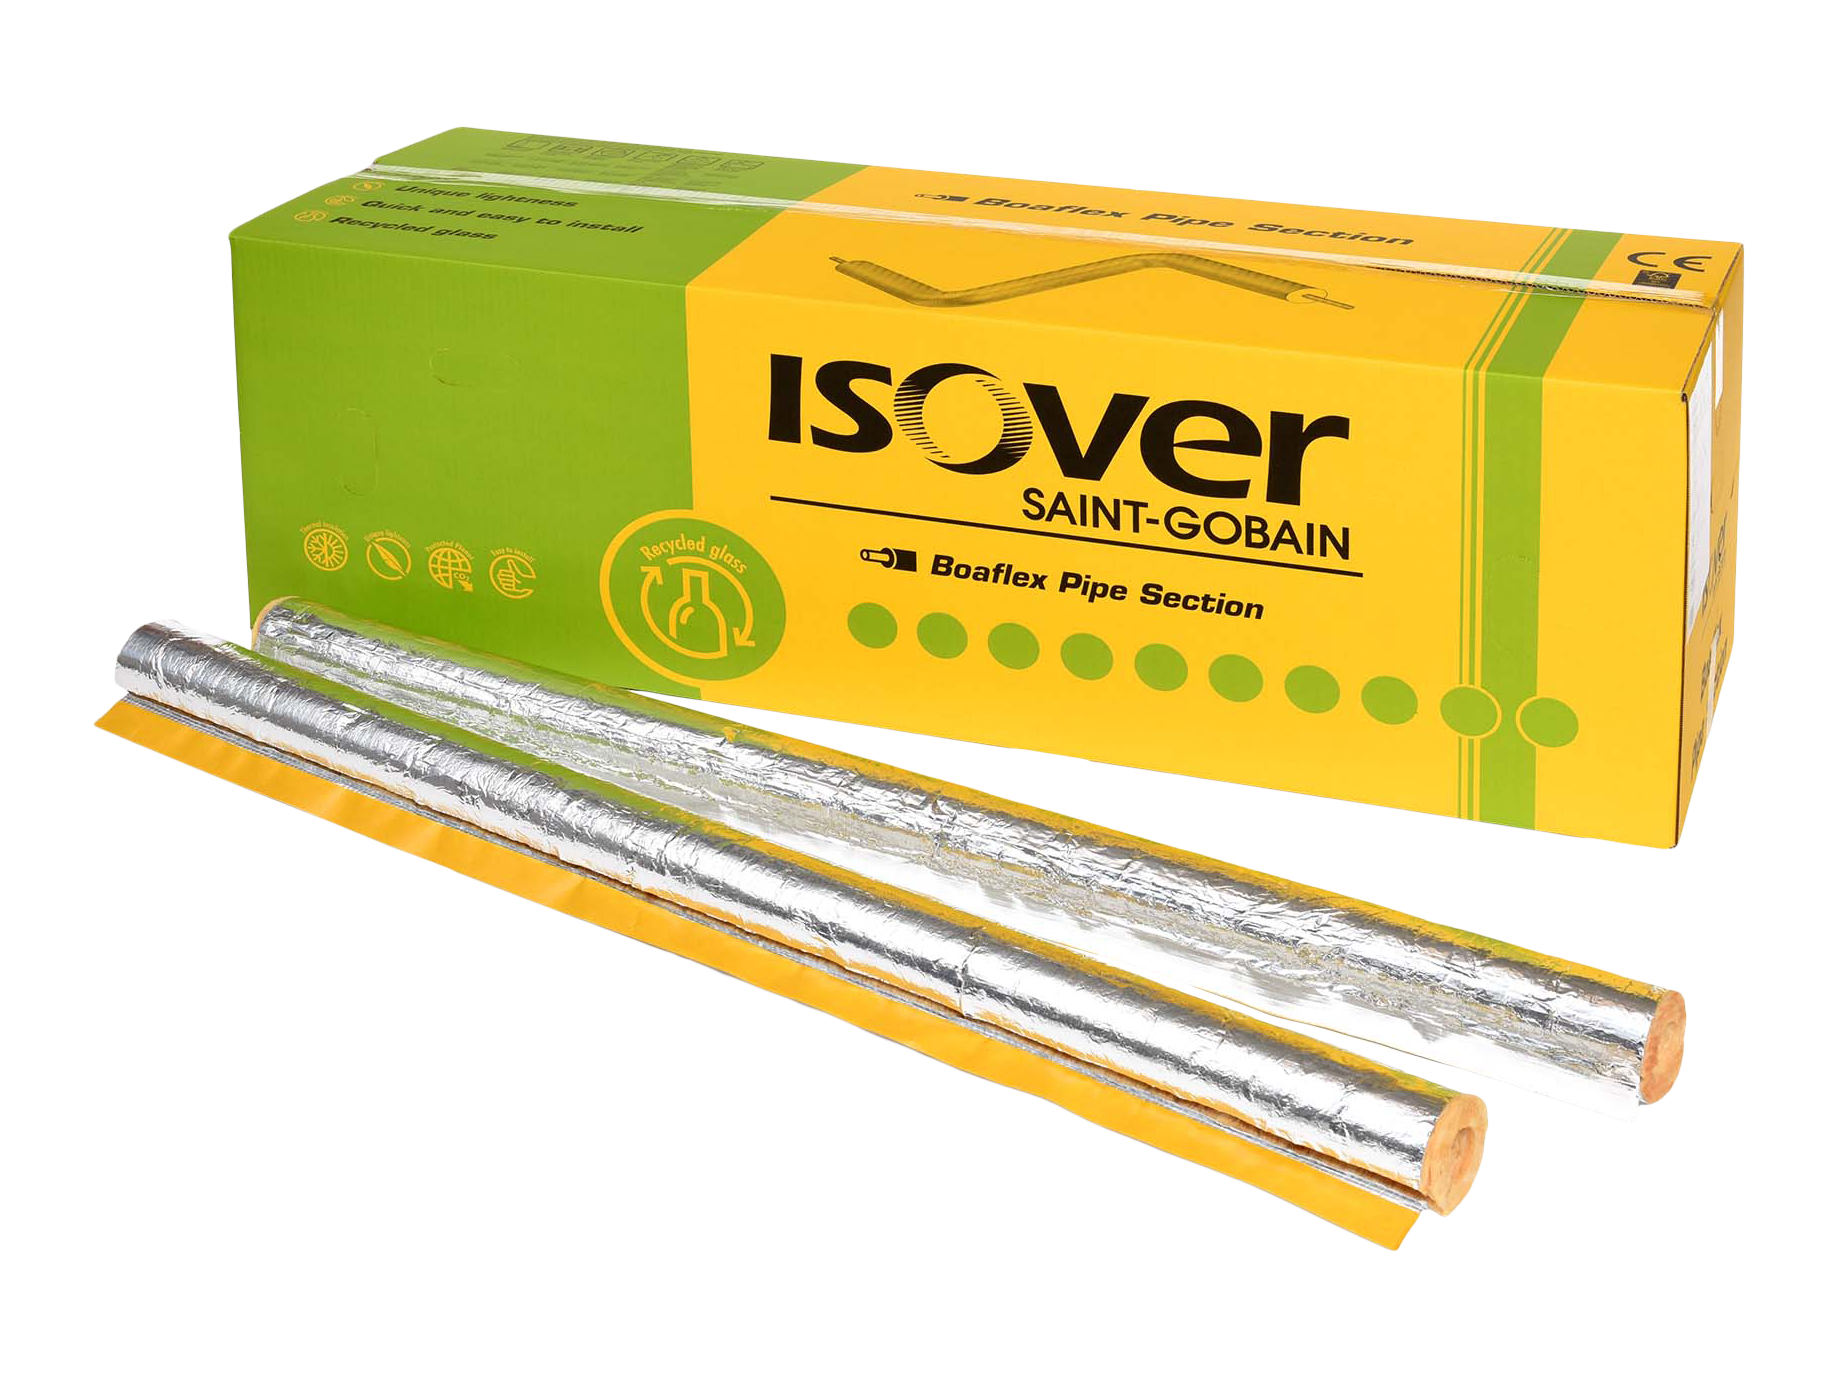 ISOVER Boaflex Pipe Section 18/30